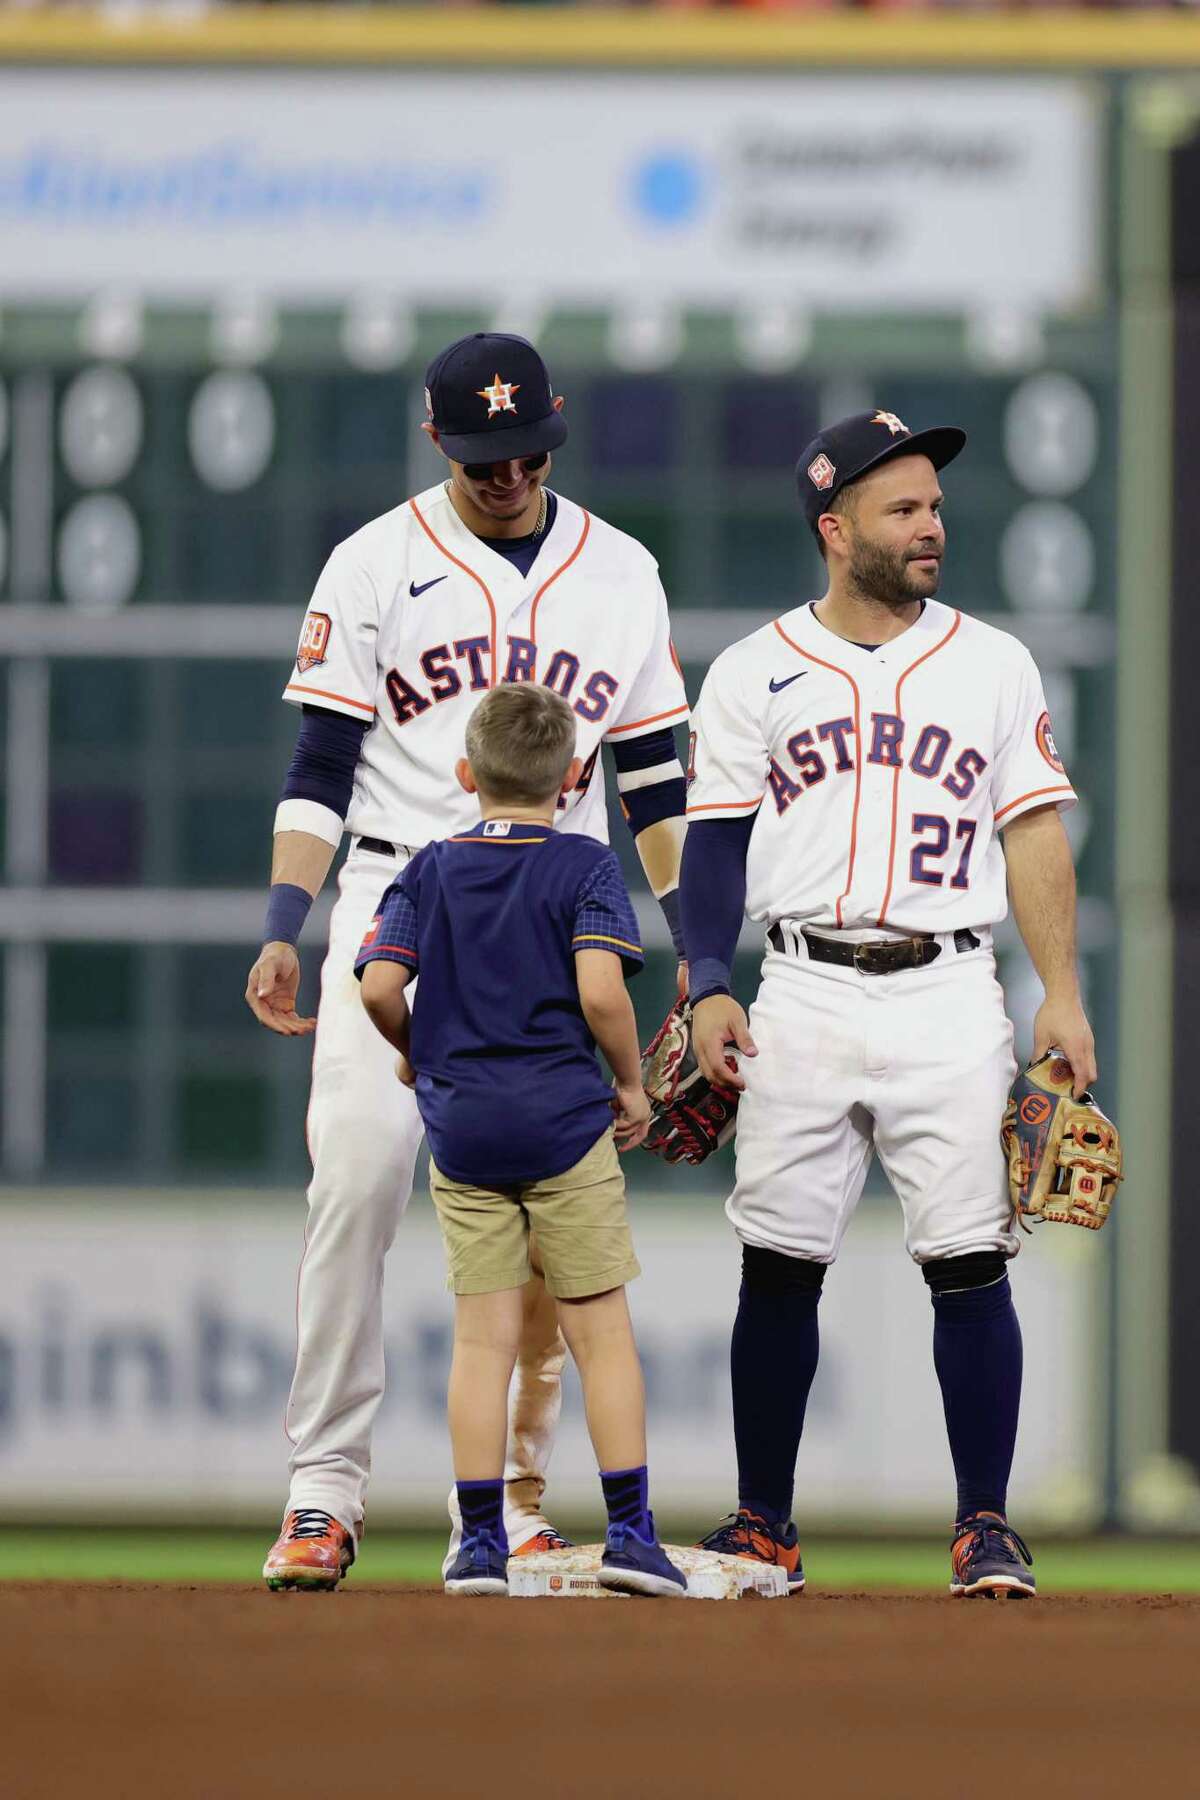 Jose Altuve #27 of the Houston Astros and Mauricio Dubon #14 try to help a young fan that confused which base he was to pick up during a seventh inning Chevy activation in a game between the Houston Astros and the New York Mets at Minute Maid Park on June 21, 2022 in Houston.